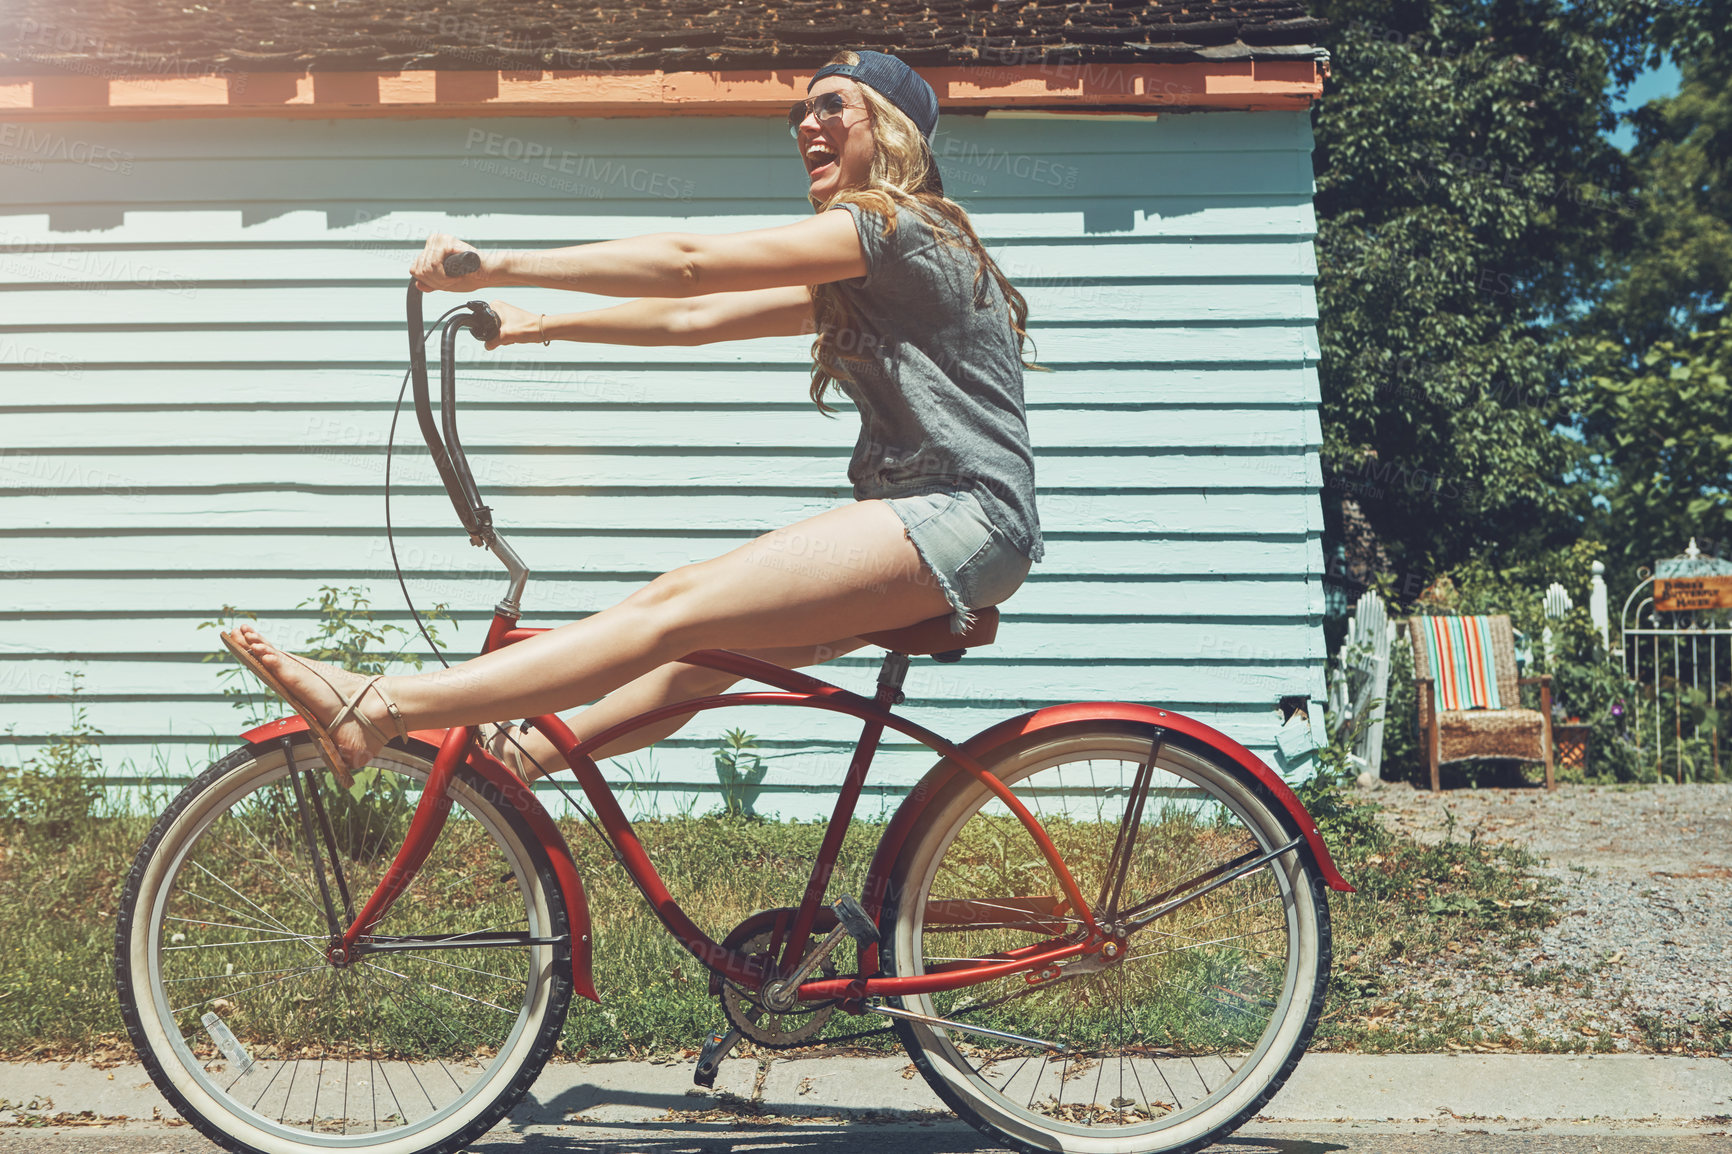 Buy stock photo Shot of an attractive young woman riding a bicycle outdoors